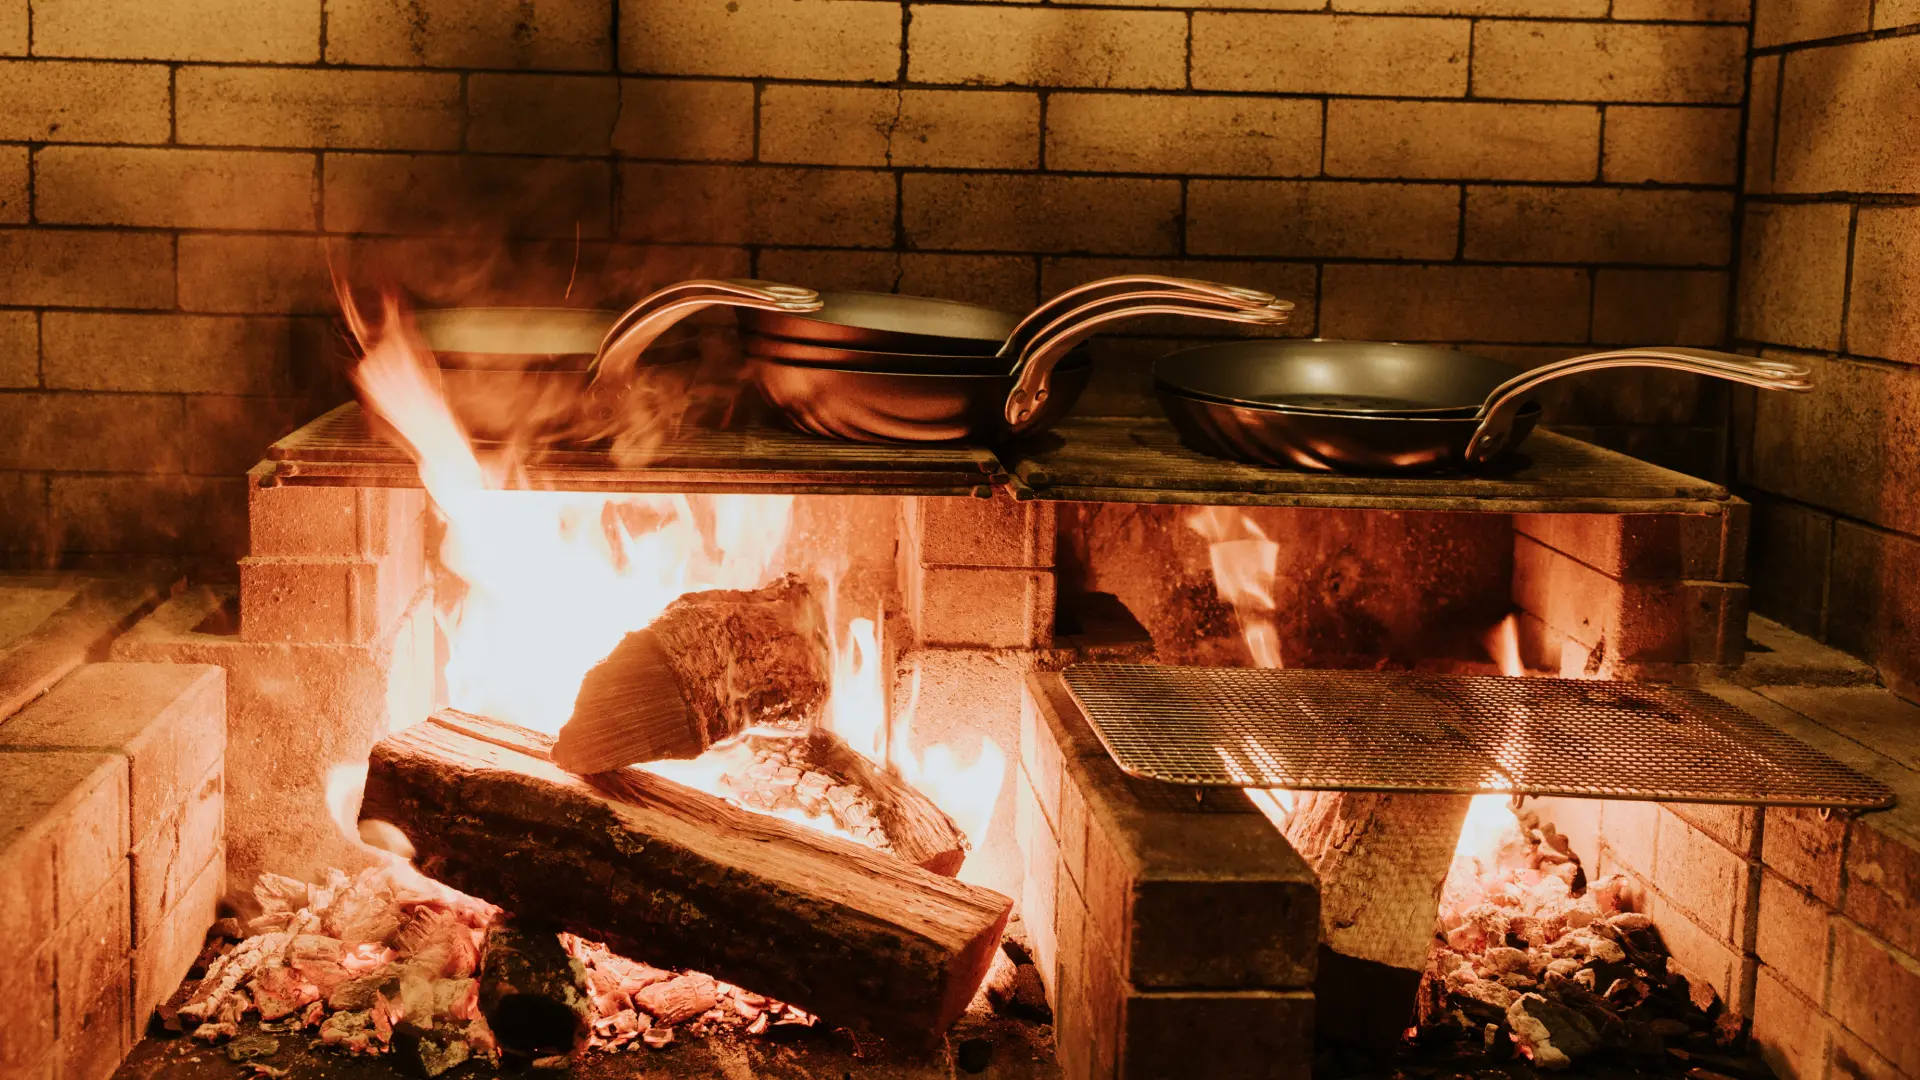 An open fire in a brick fireplace with pans on top, cooking food over the flames.